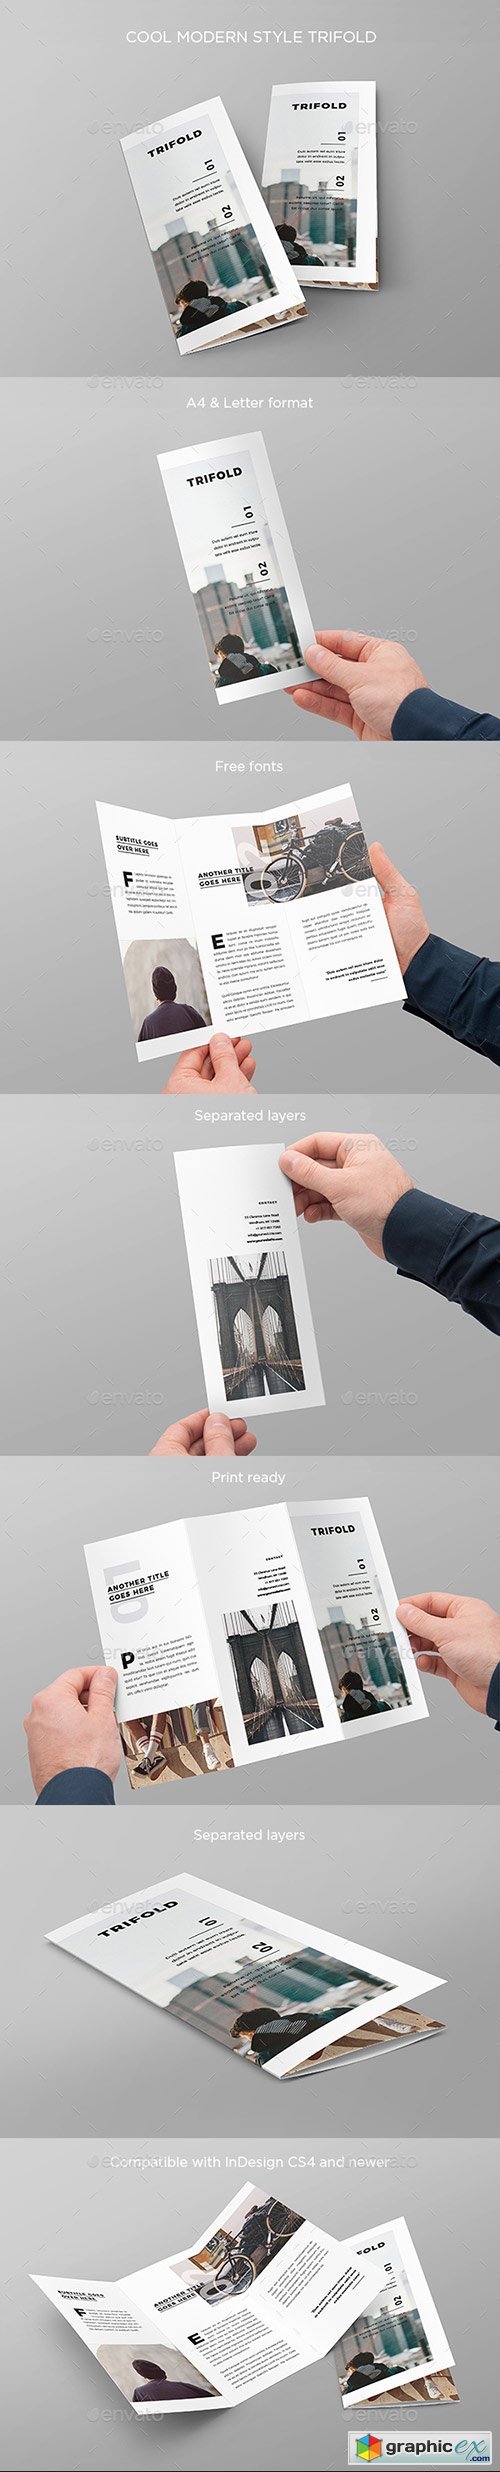 Cool Modern Style Trifold